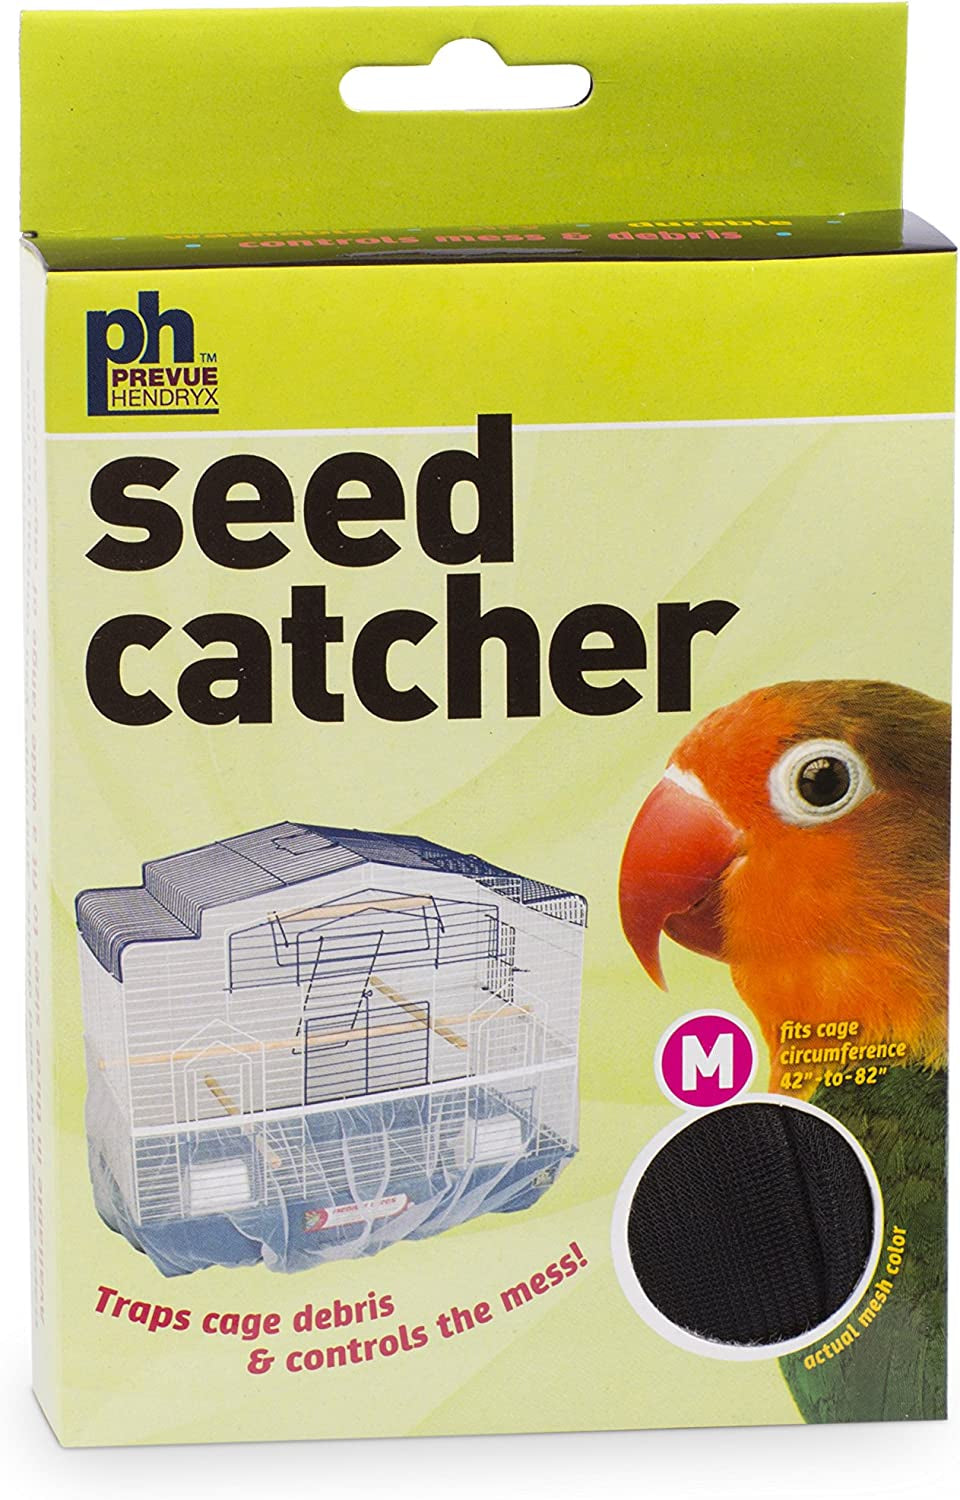 Prevue Seed Catcher Traps Cage Debris and Controls the Mess - Medium - 1 count-